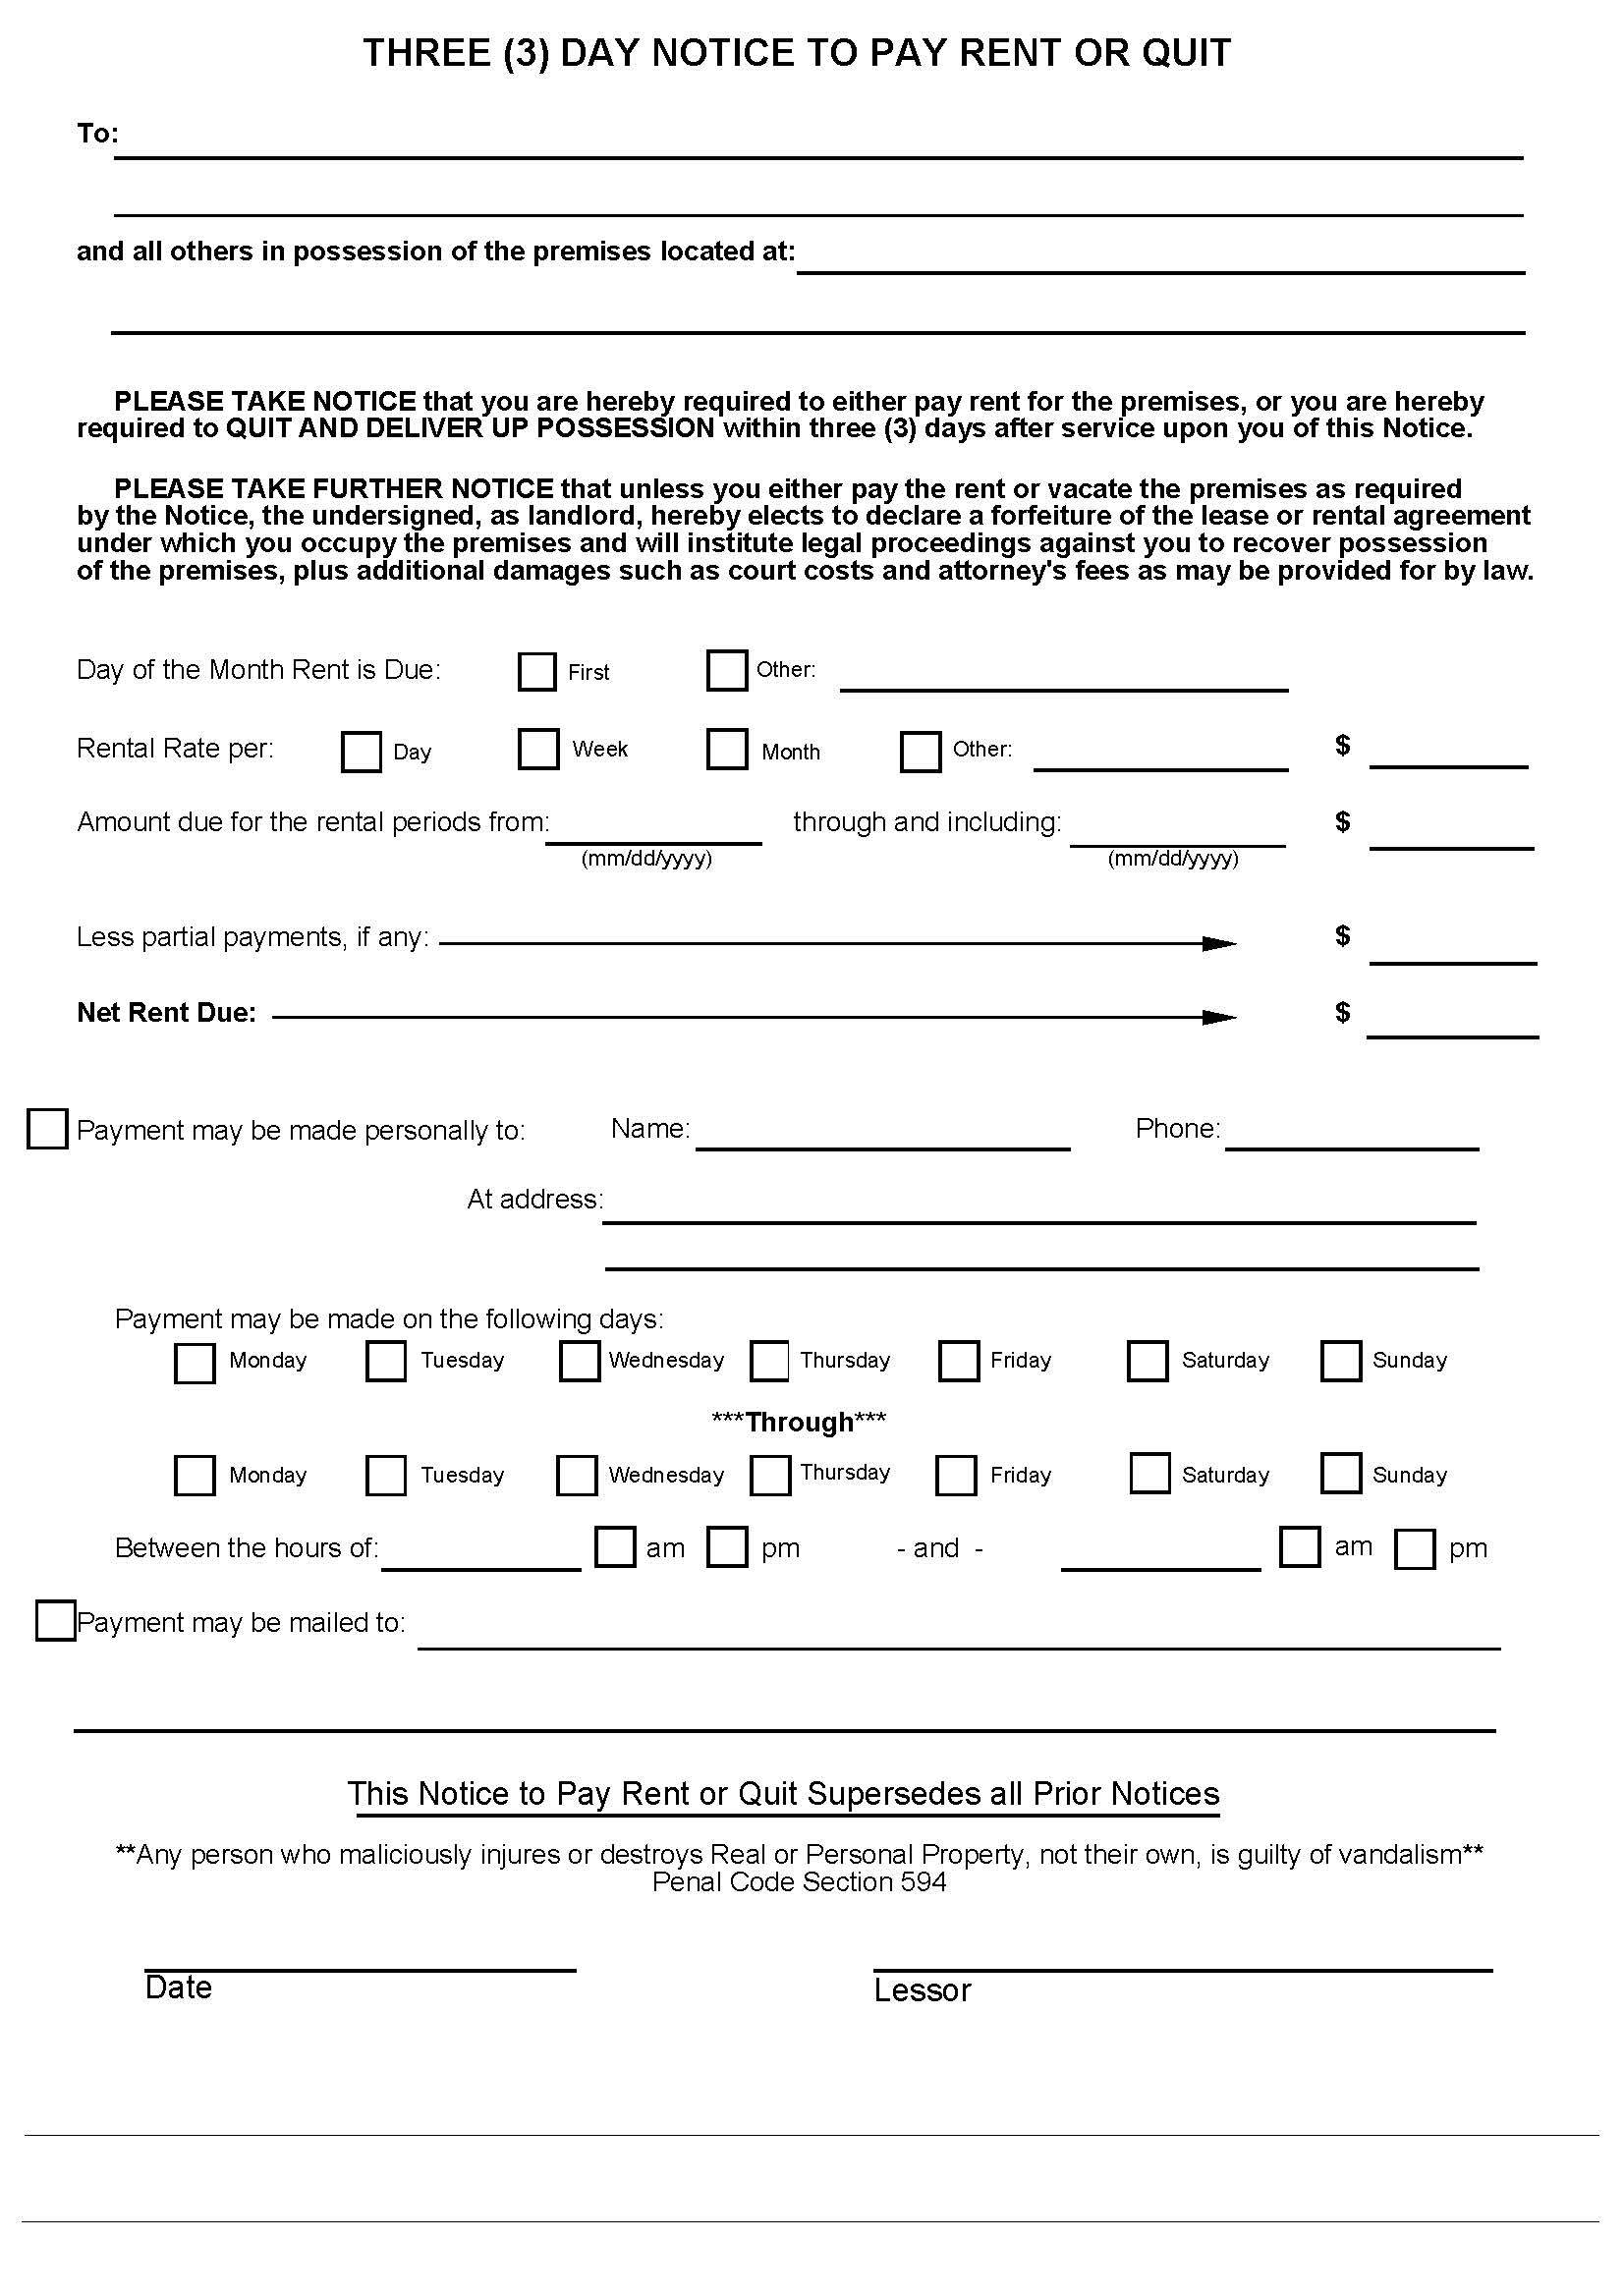 california-printable-3-day-notice-to-quit-form-printable-forms-free